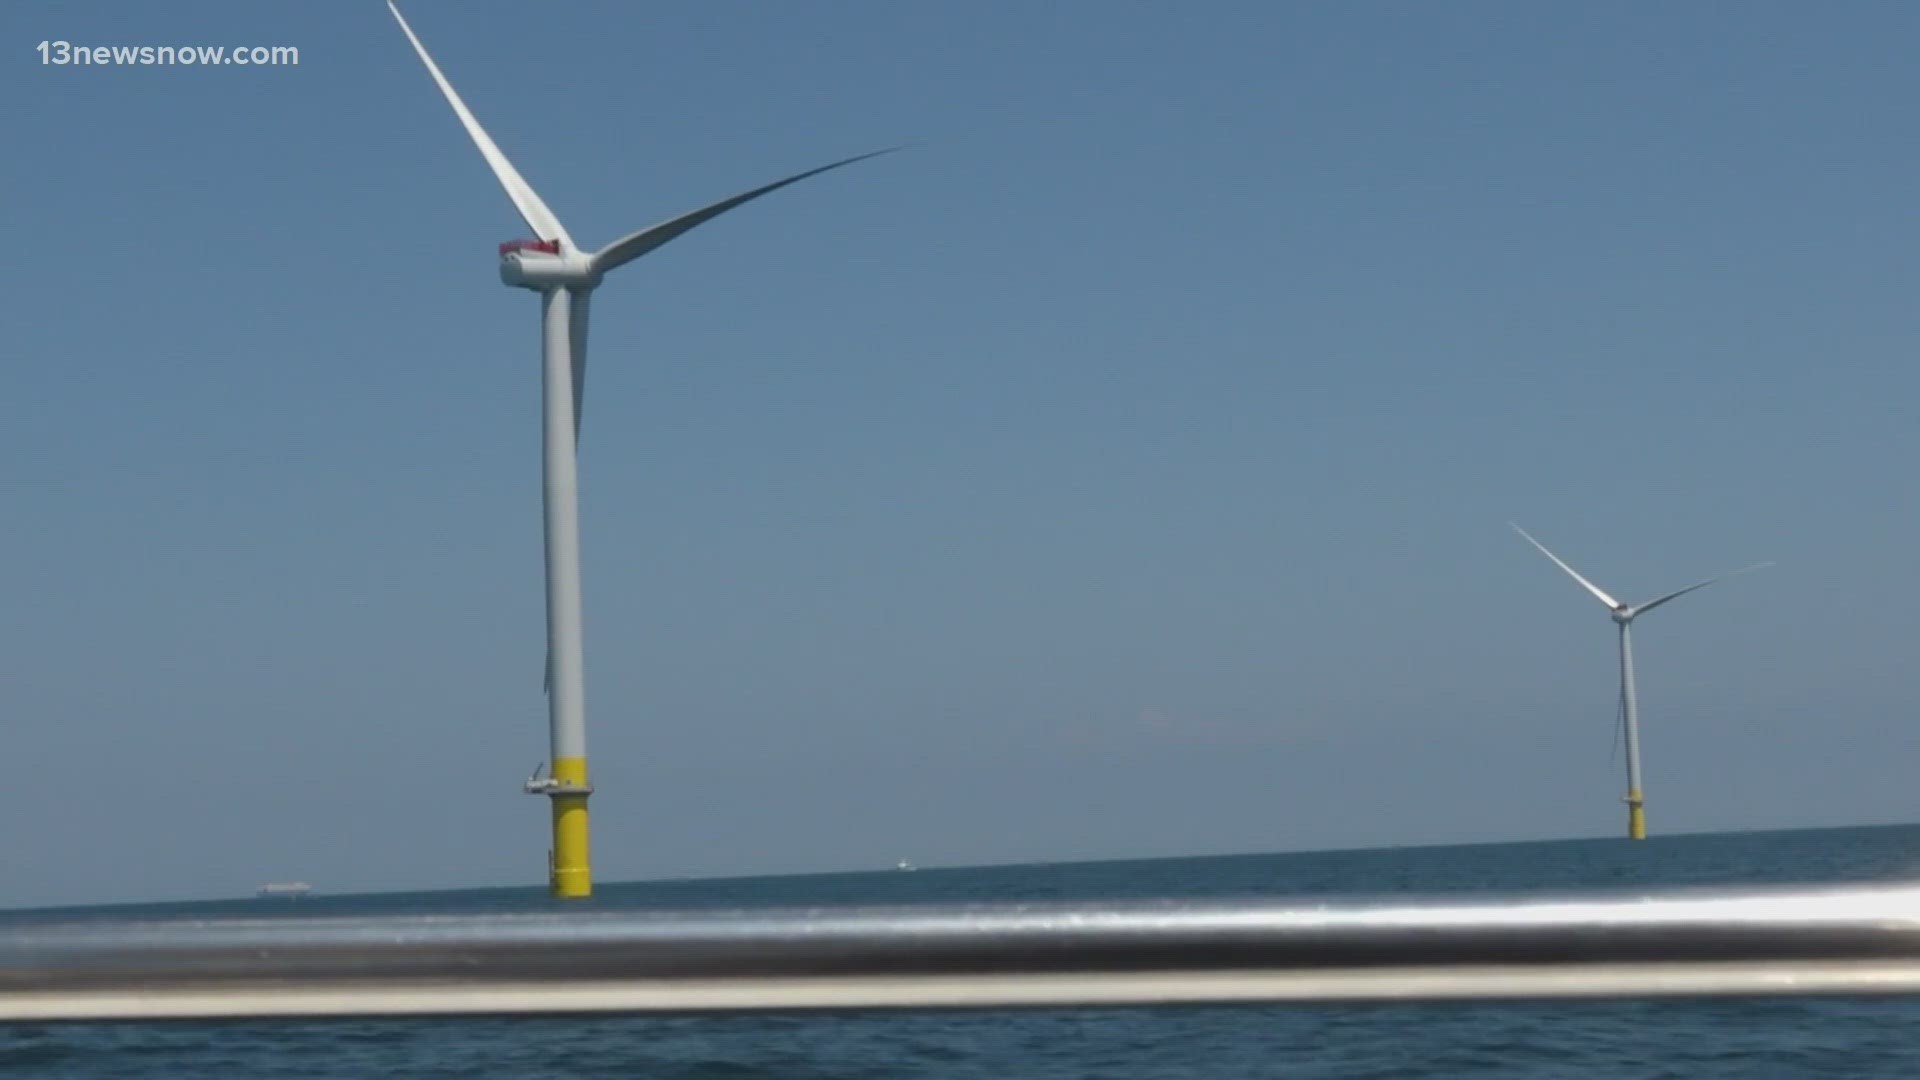 Offshore wind turbines need rare earth metals. Will there be